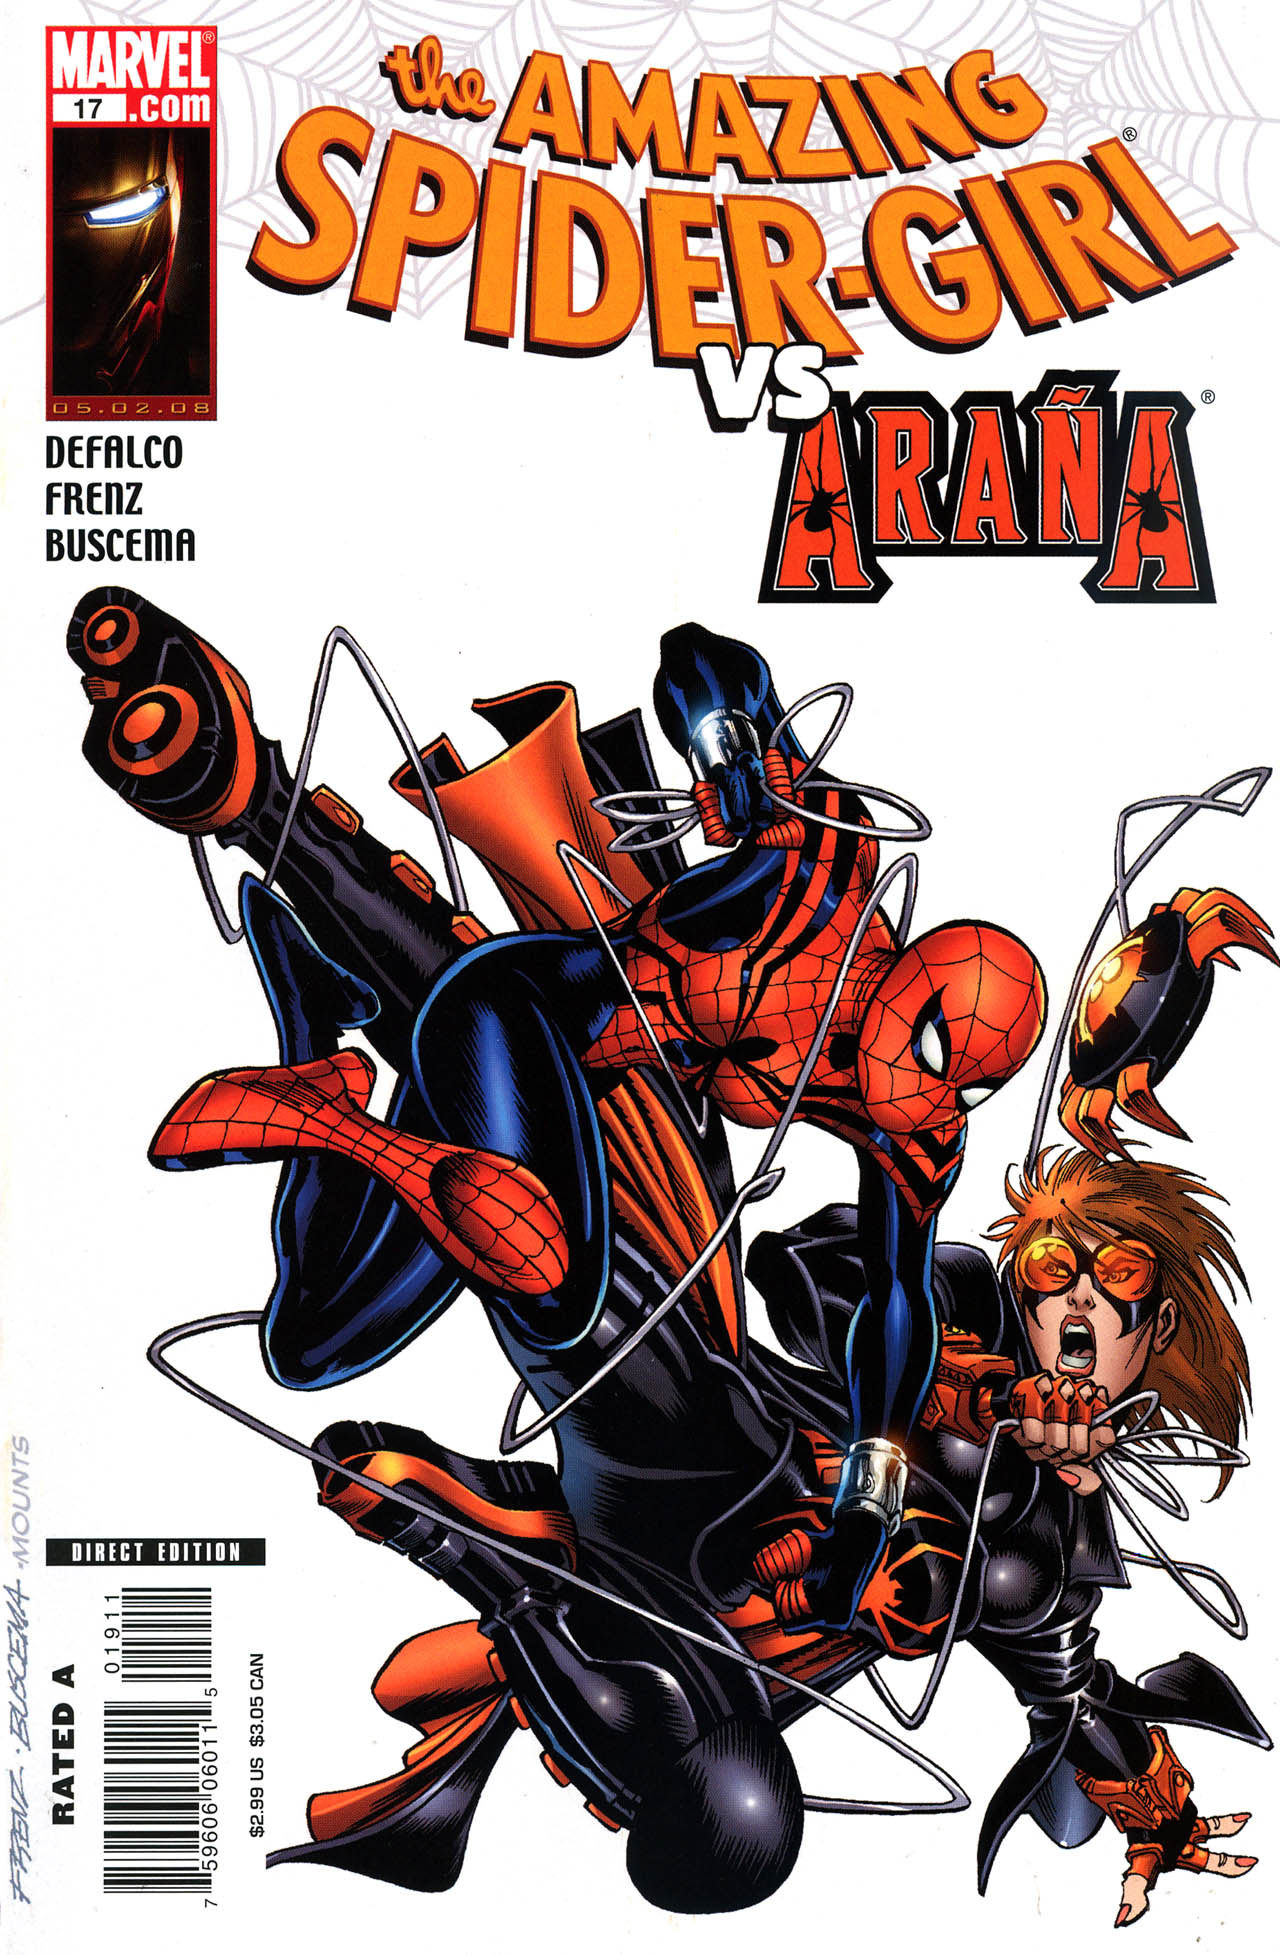 Read online Amazing Spider-Girl comic -  Issue #19 - 1